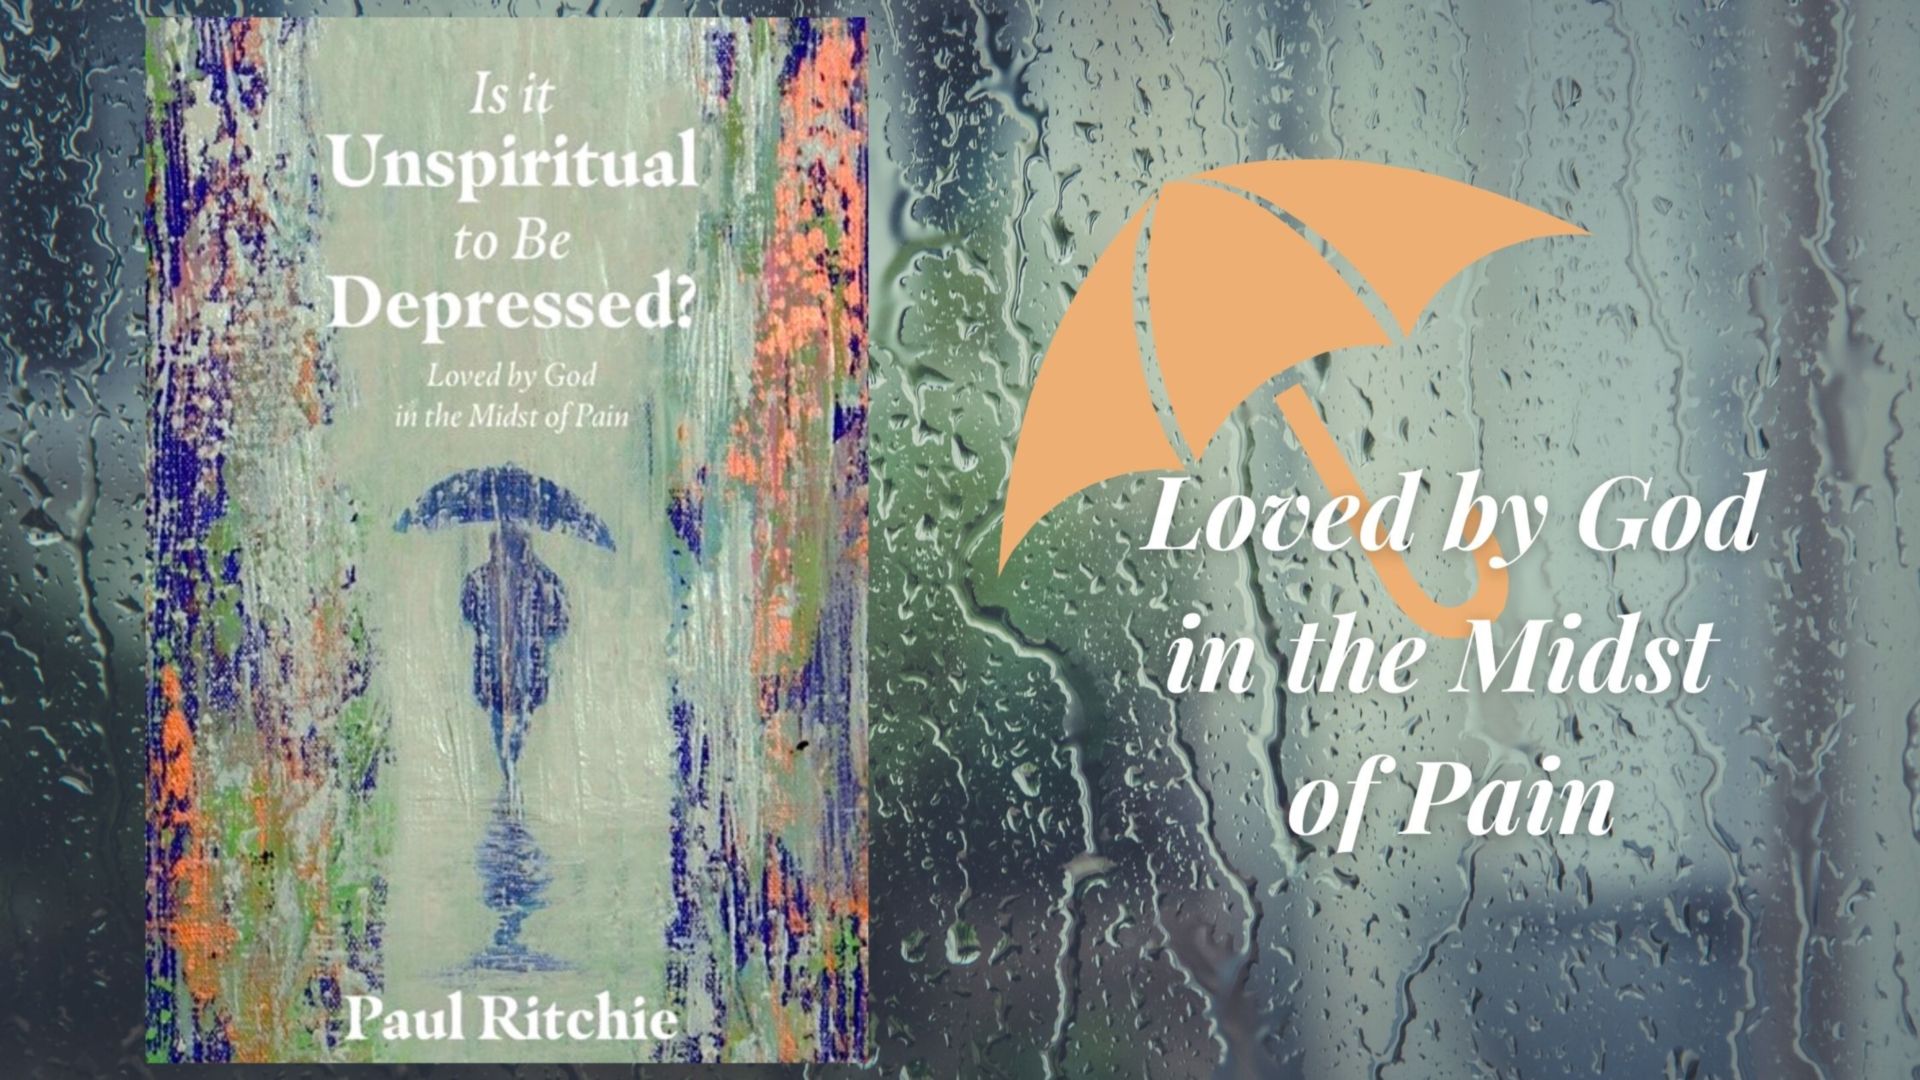 Interview with Paul Ritchie, author of 'Is it Unspiritual to be Depressed?'